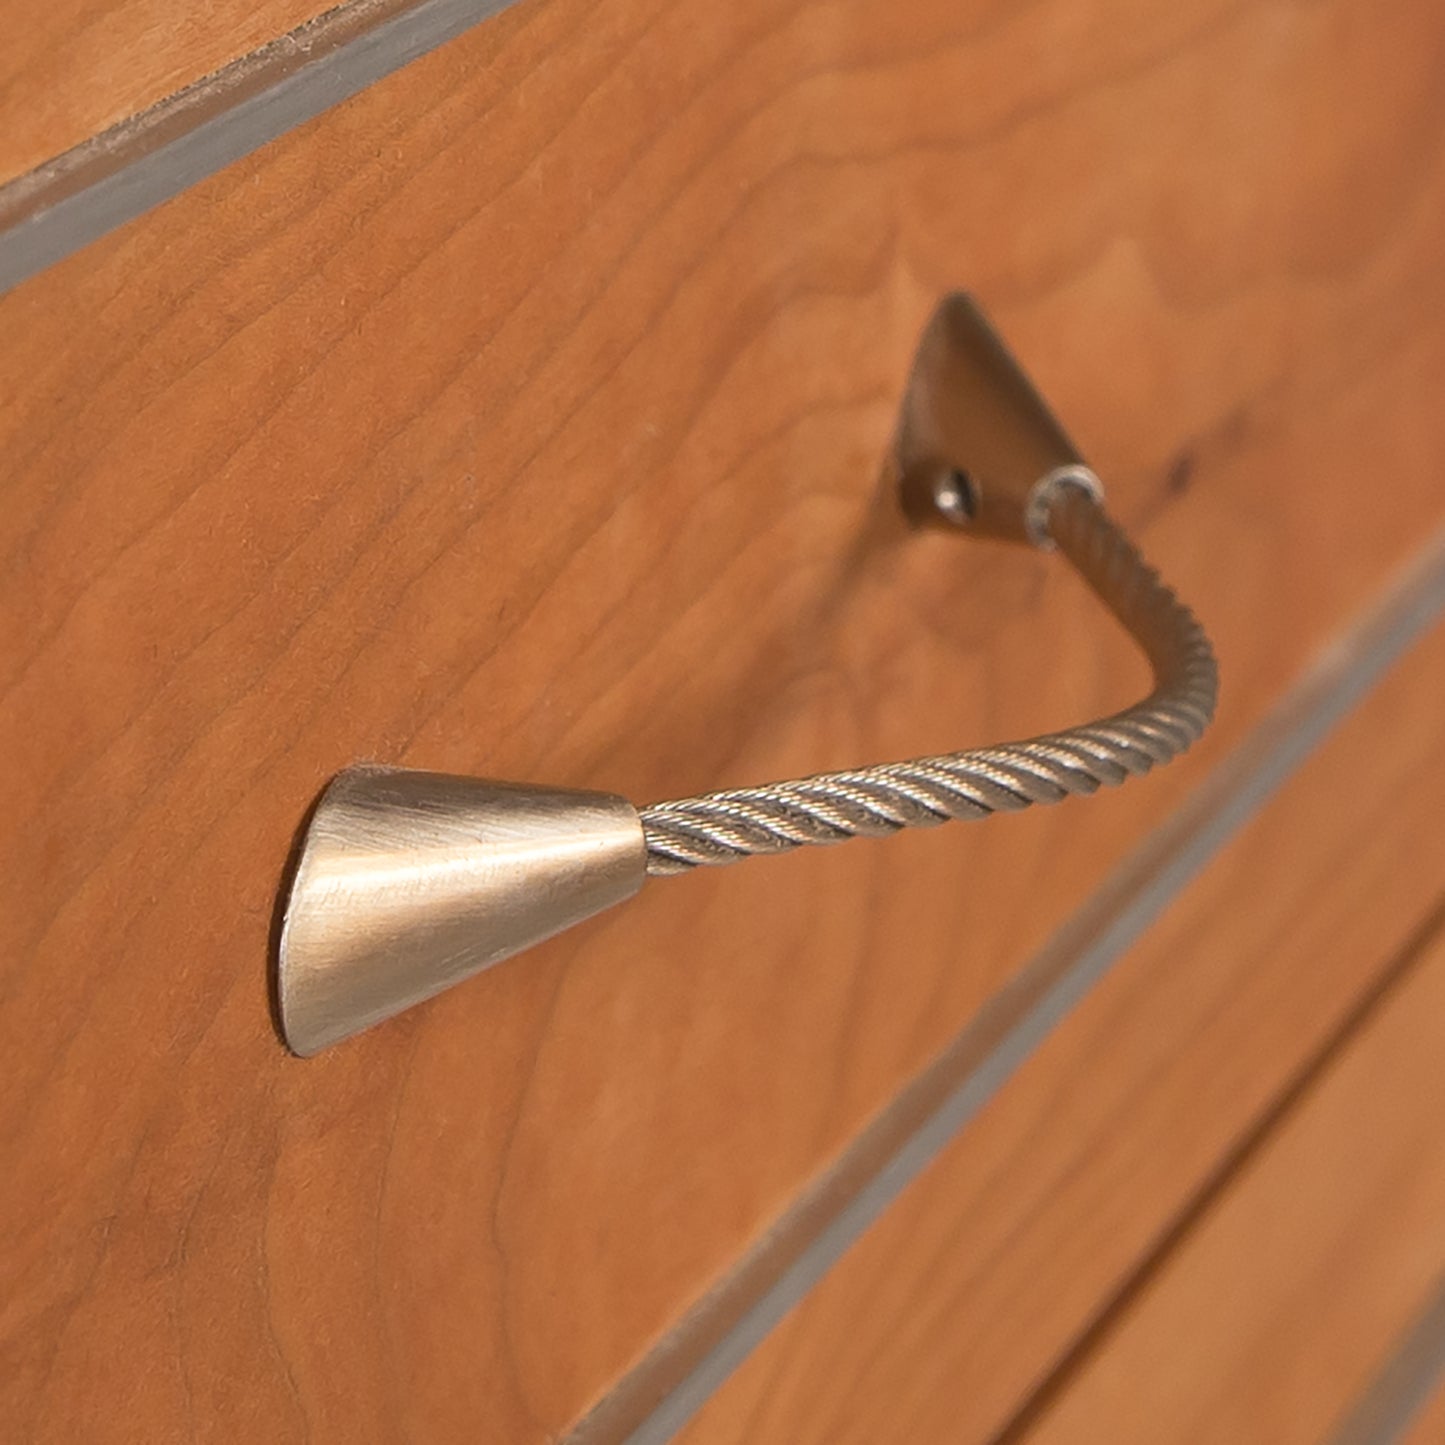 A handcrafted in Vermont metal door stopper with a spring design mounted on a wooden baseboard by Vermont Furniture Designs.